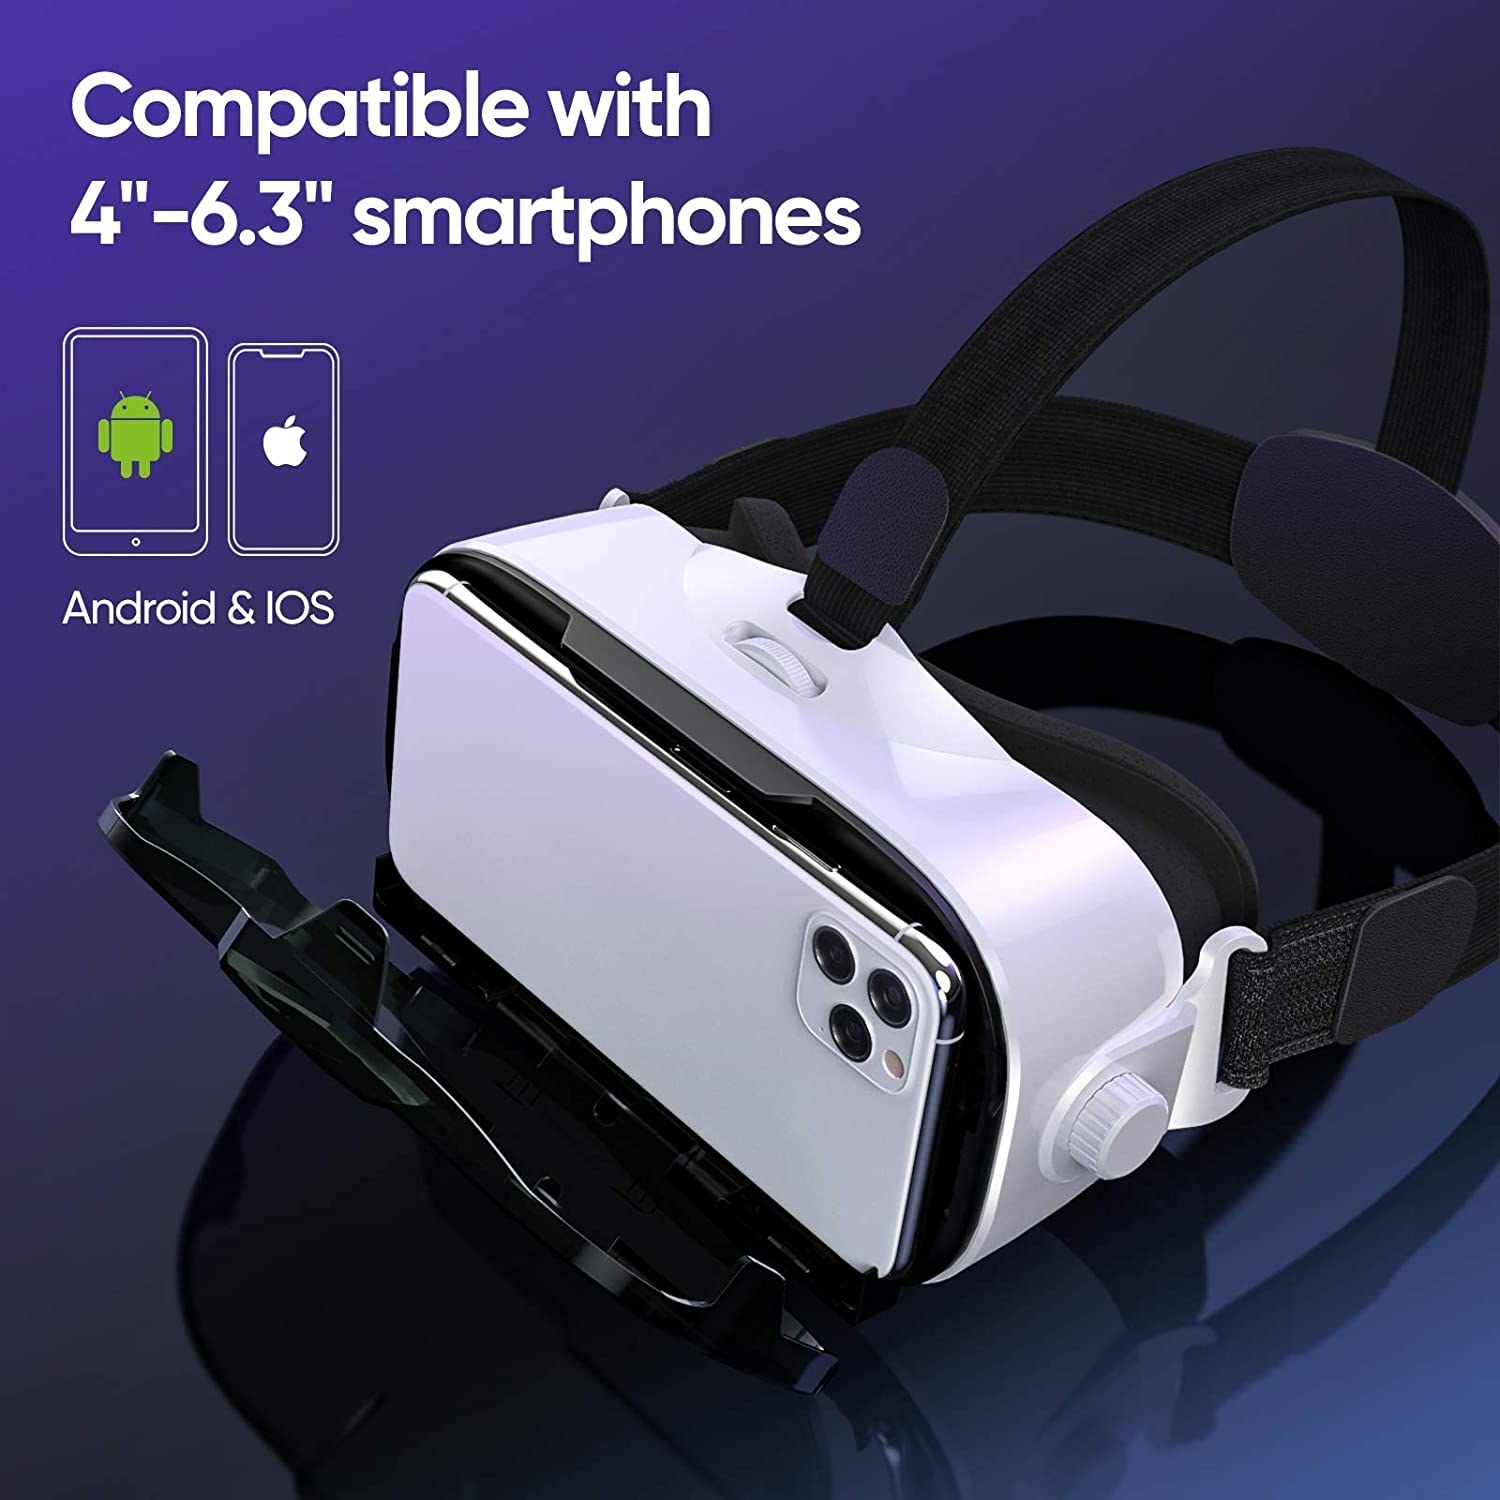 the VR headset